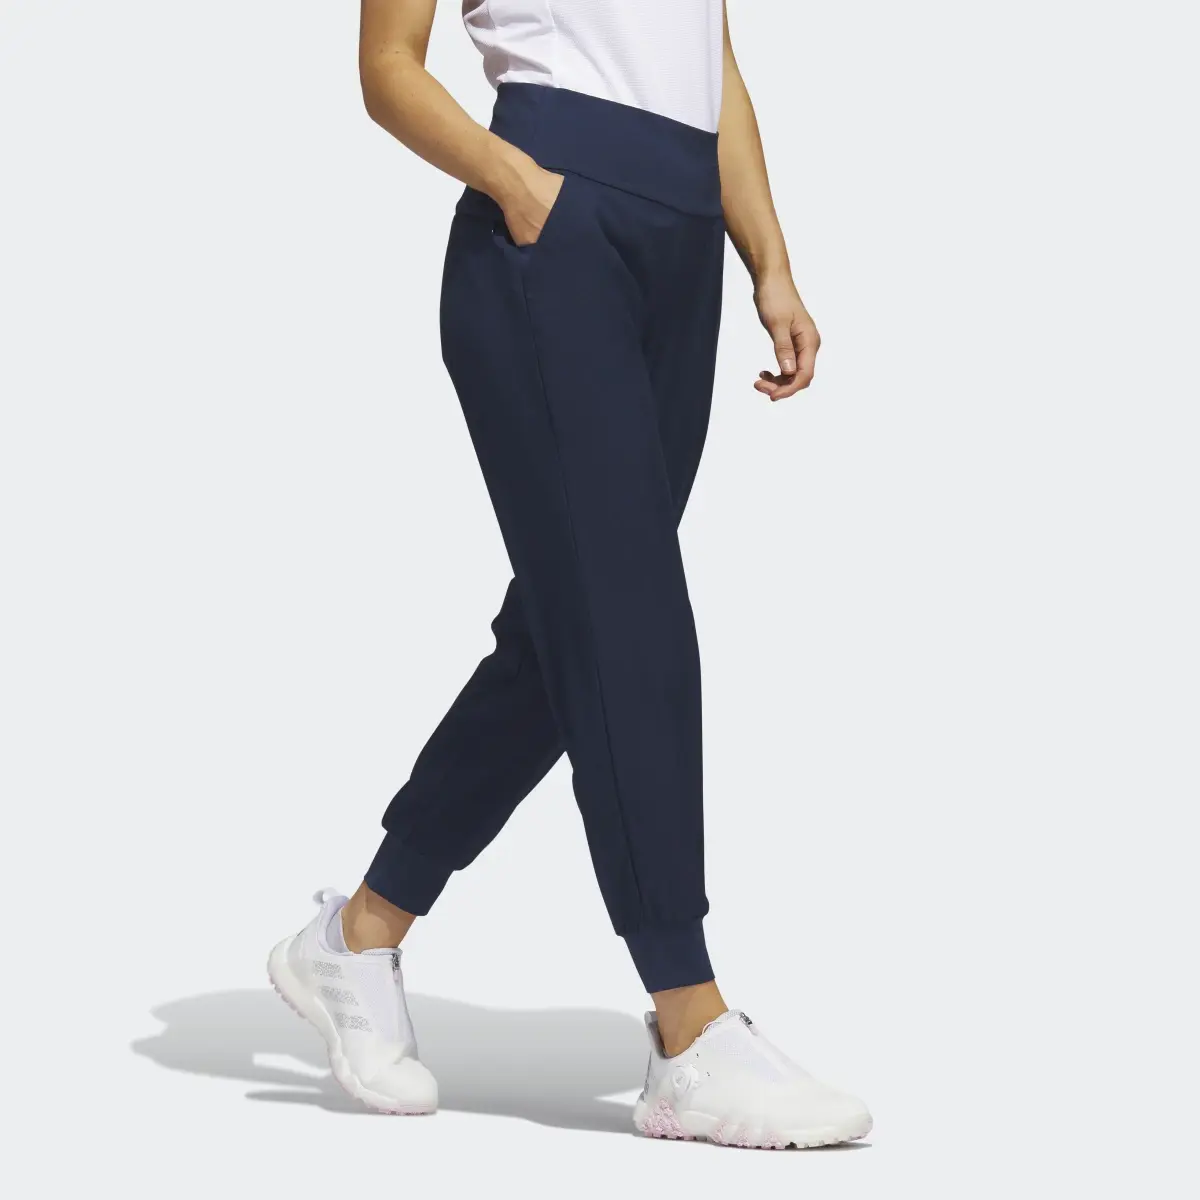 Adidas Essentials Jogger Trousers. 3